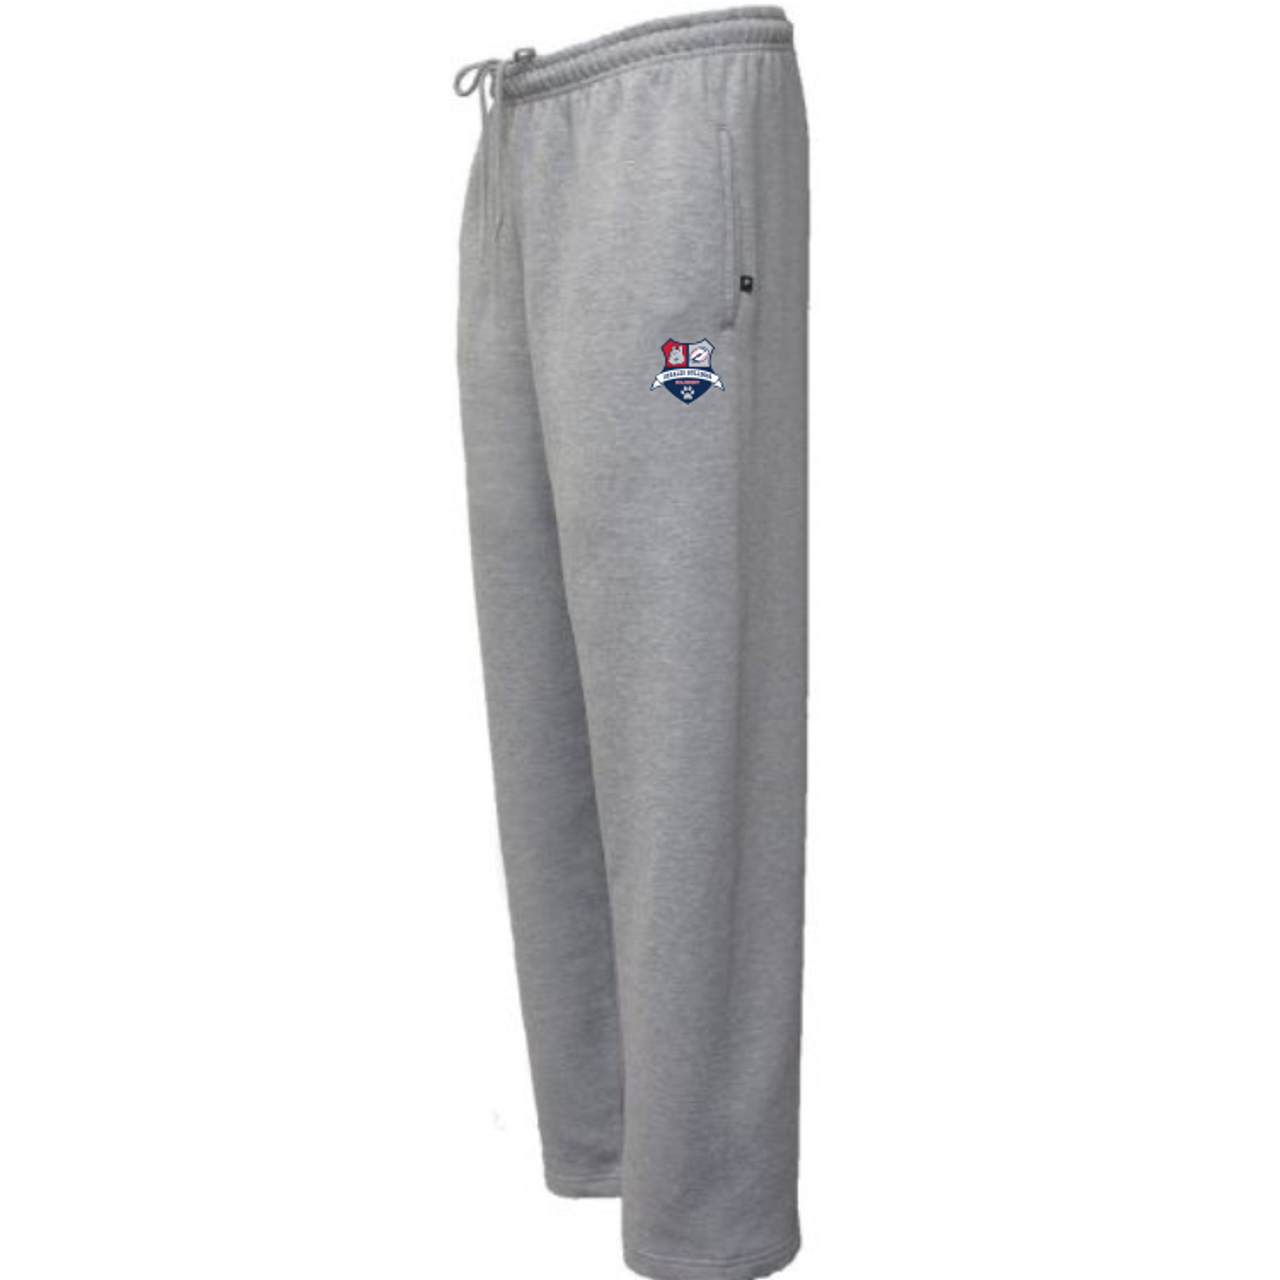 DeSales Rugby Sweatpant, Gray